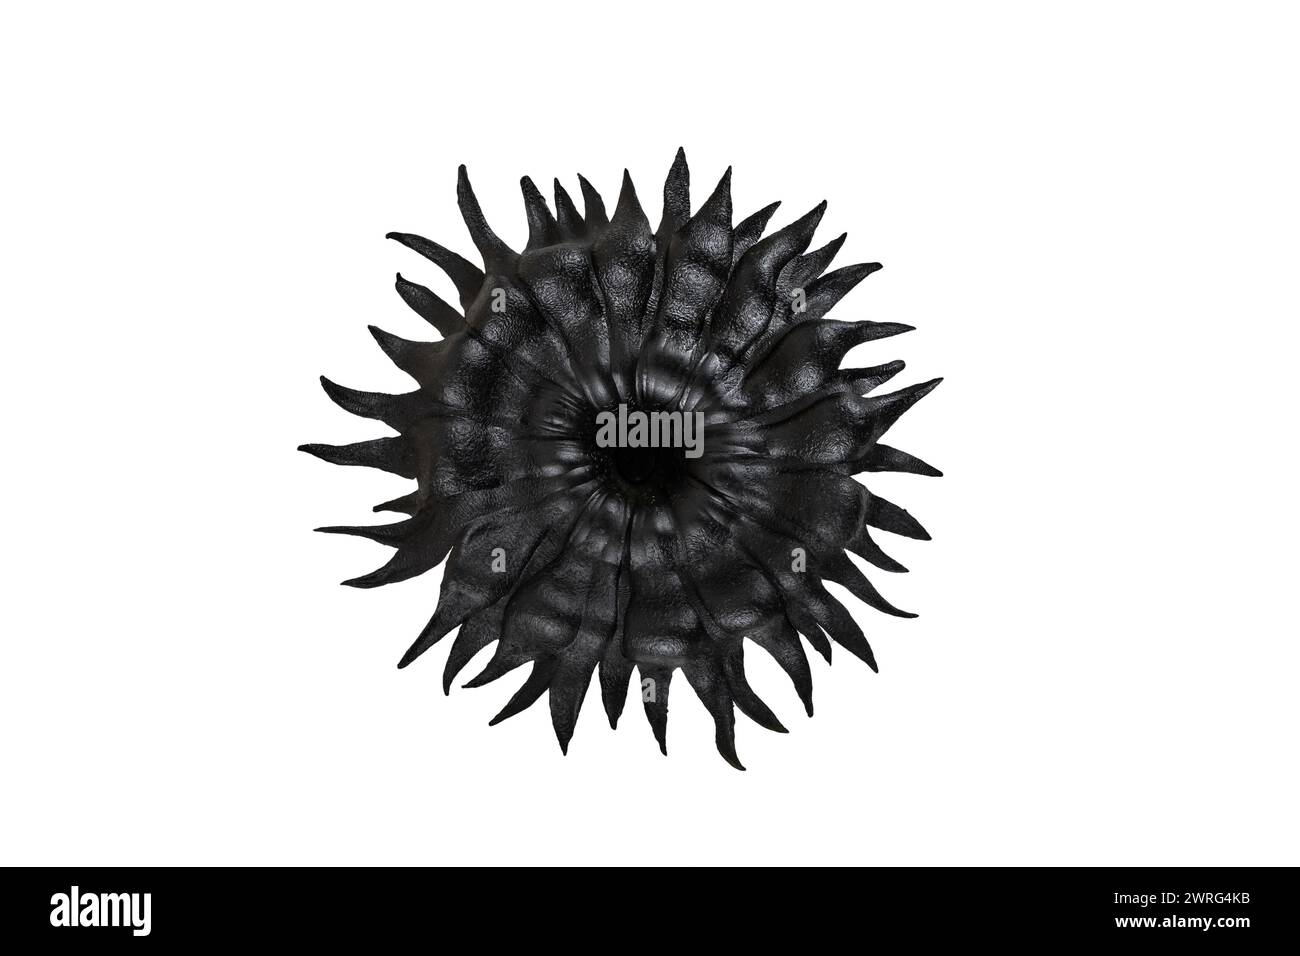 Black sun or sun flower isolated on white background, abstract textured backdrop Stock Photo